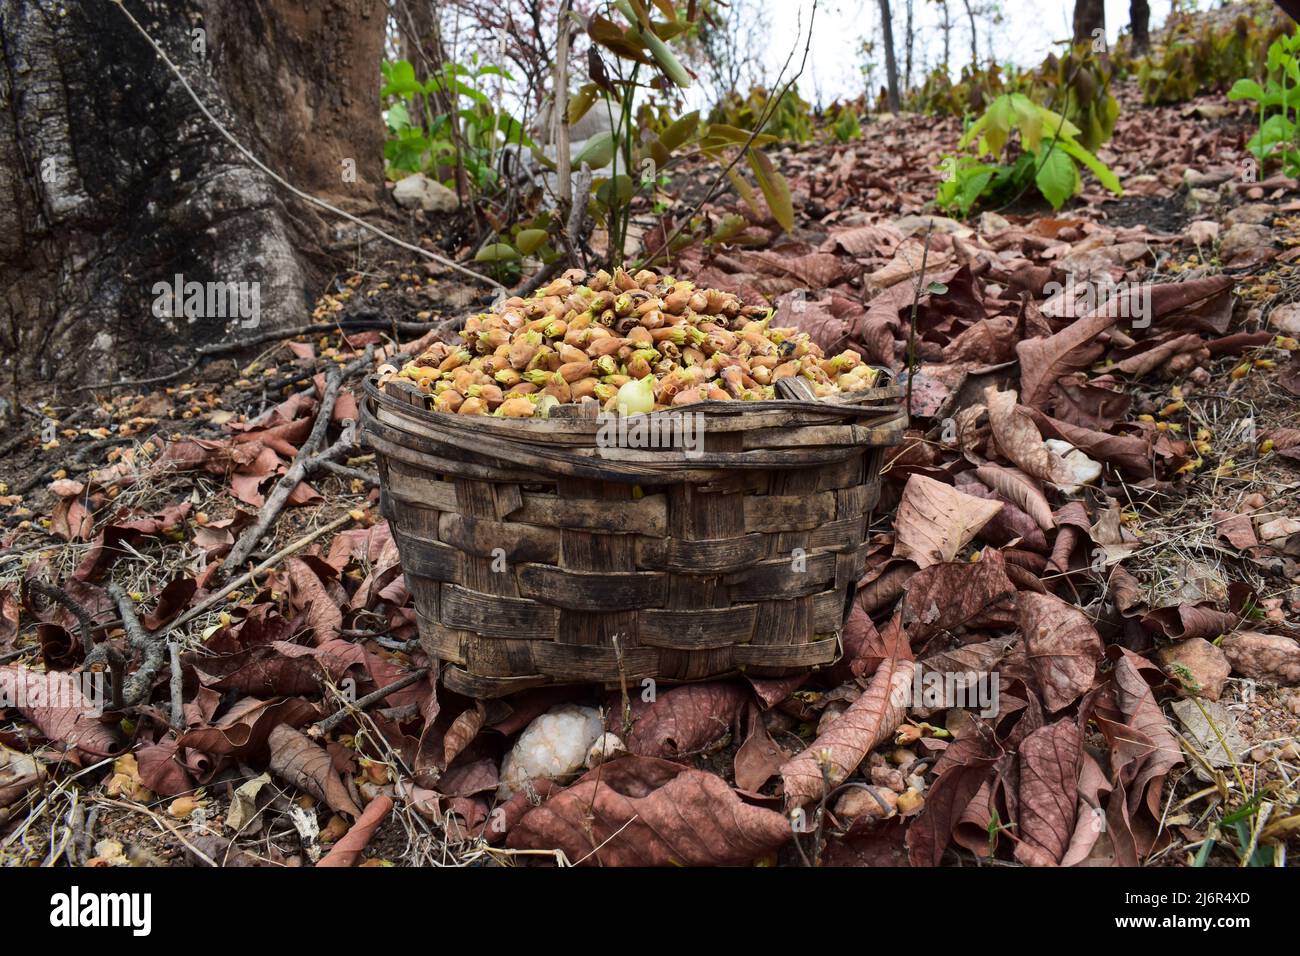 Mahua flowers naturally dried and picked in bamboo basket in Forest area of Madhyapradesh in India. Tribal wild fruits flowers of Mahuwa tree also kno Stock Photo